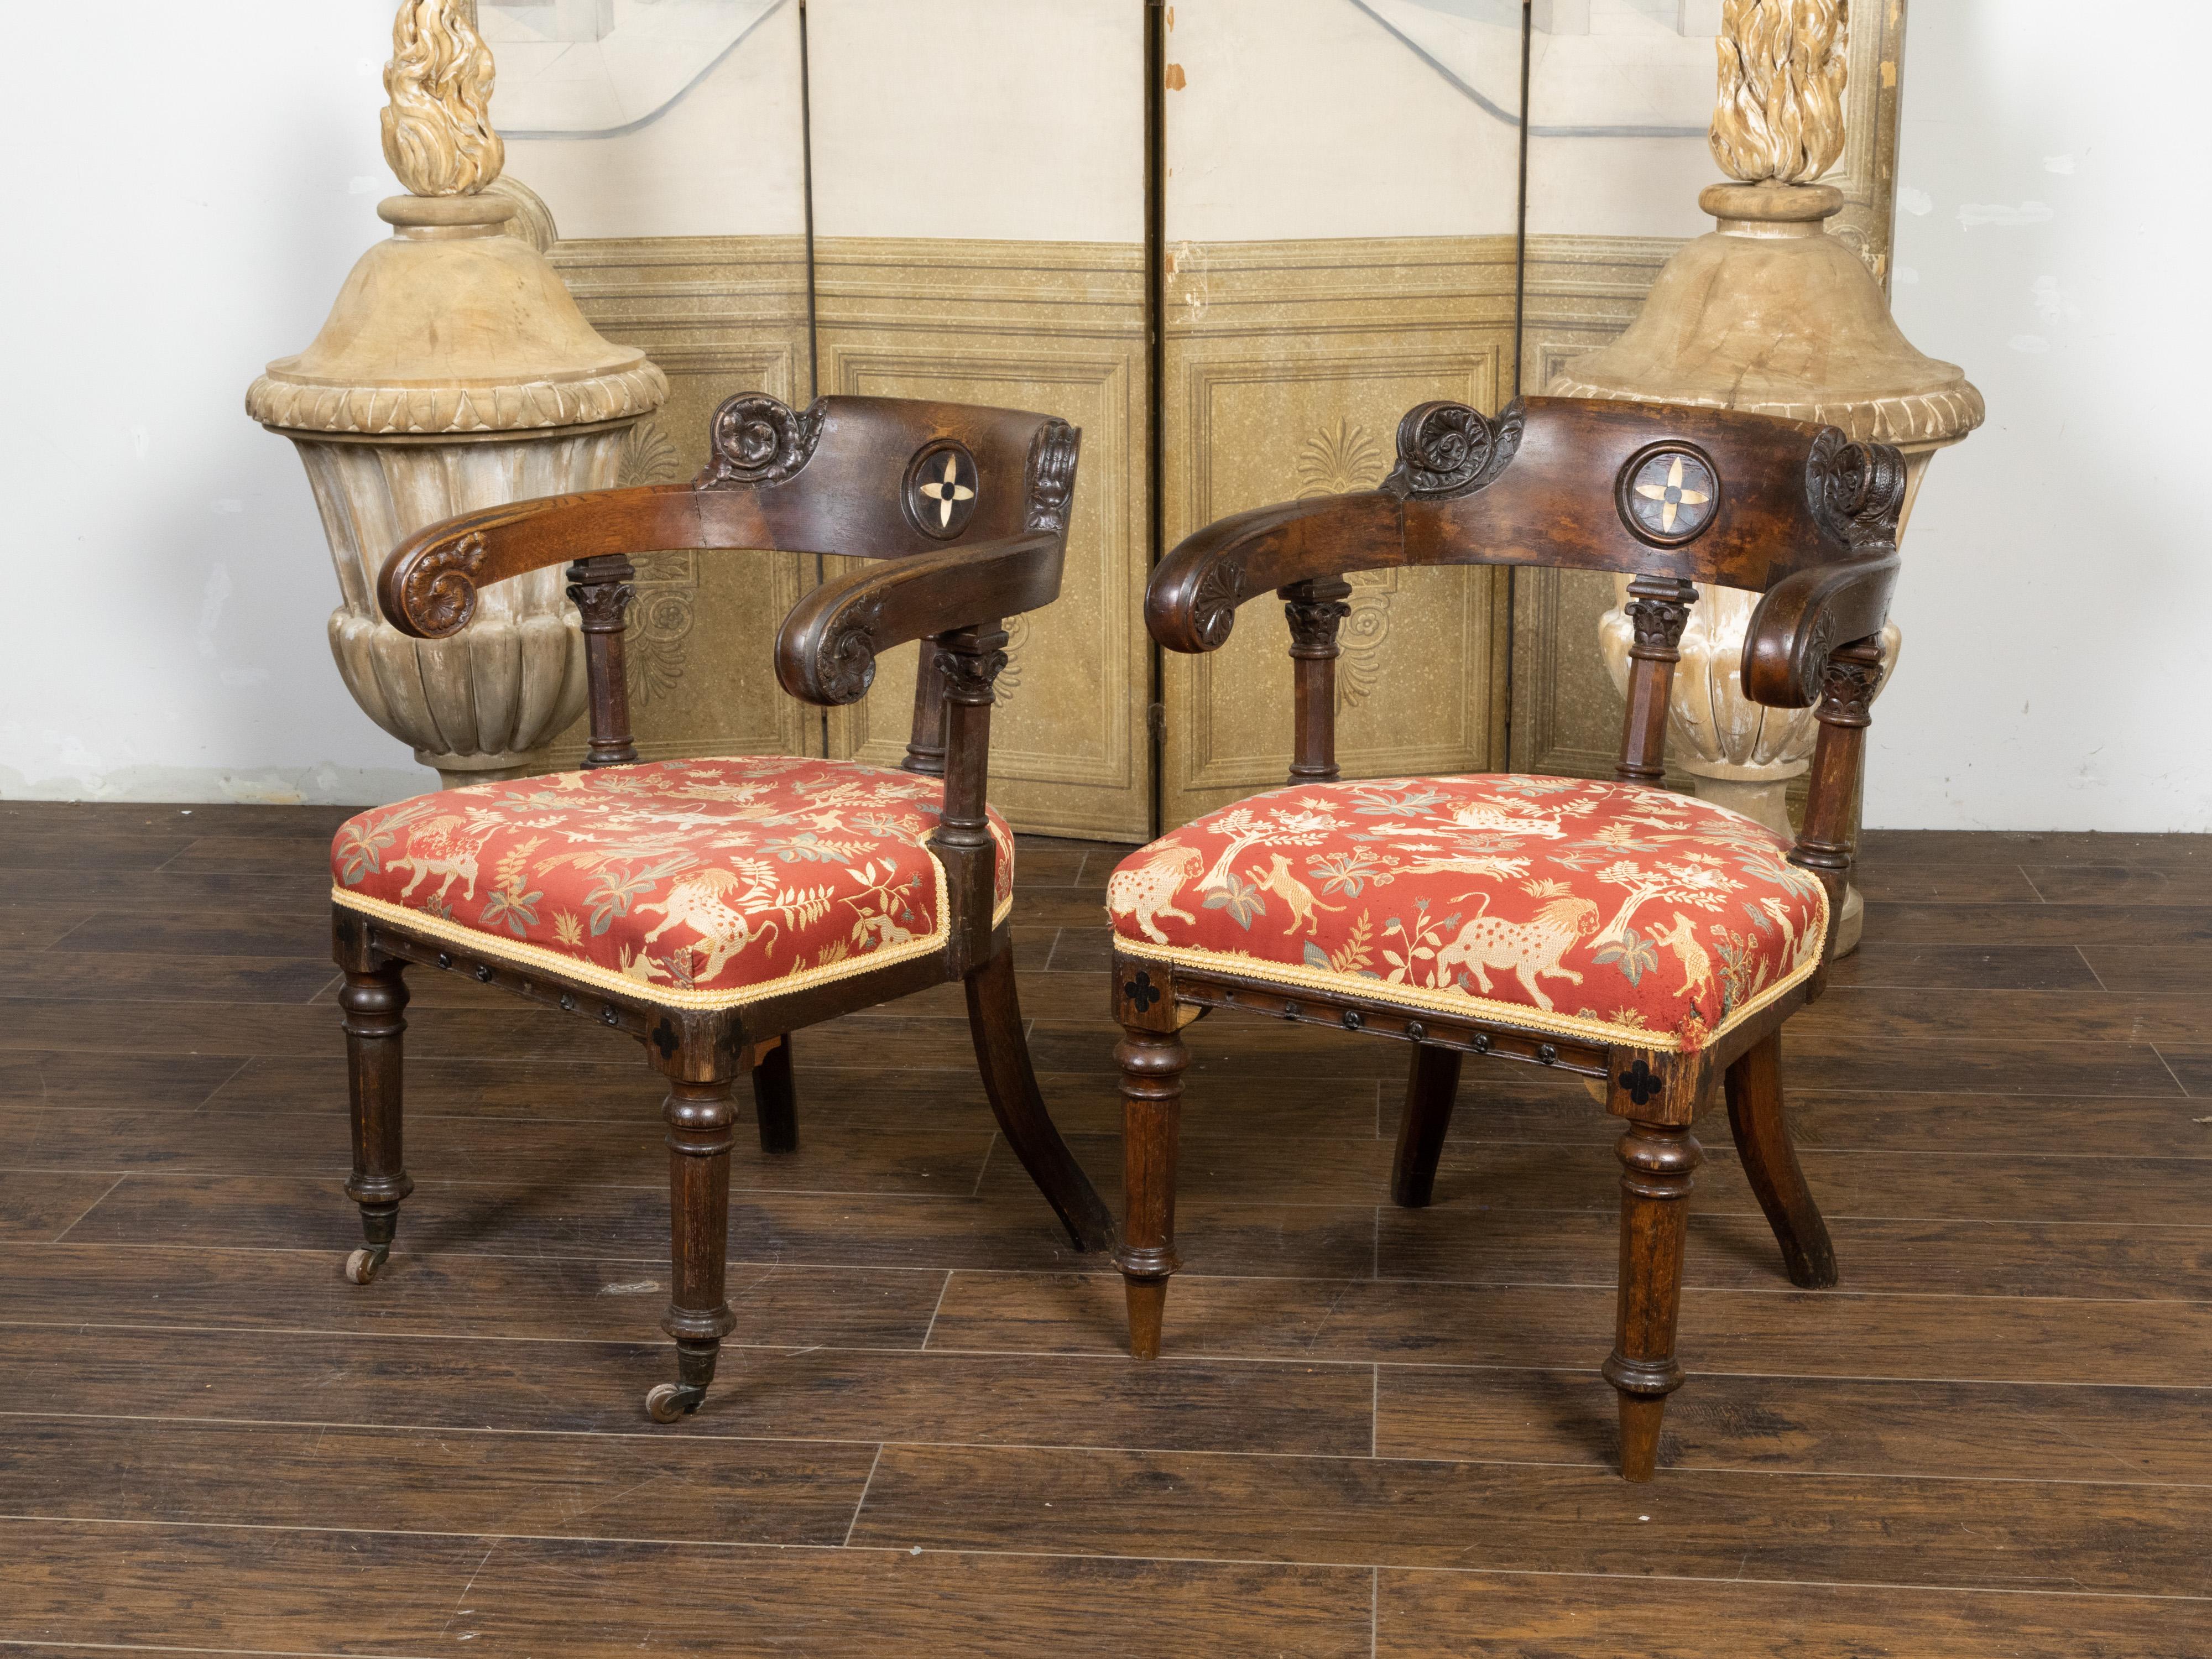 Pair of English Regency Style Carved Oak Klismos Chairs with Horseshoe Backs In Good Condition For Sale In Atlanta, GA